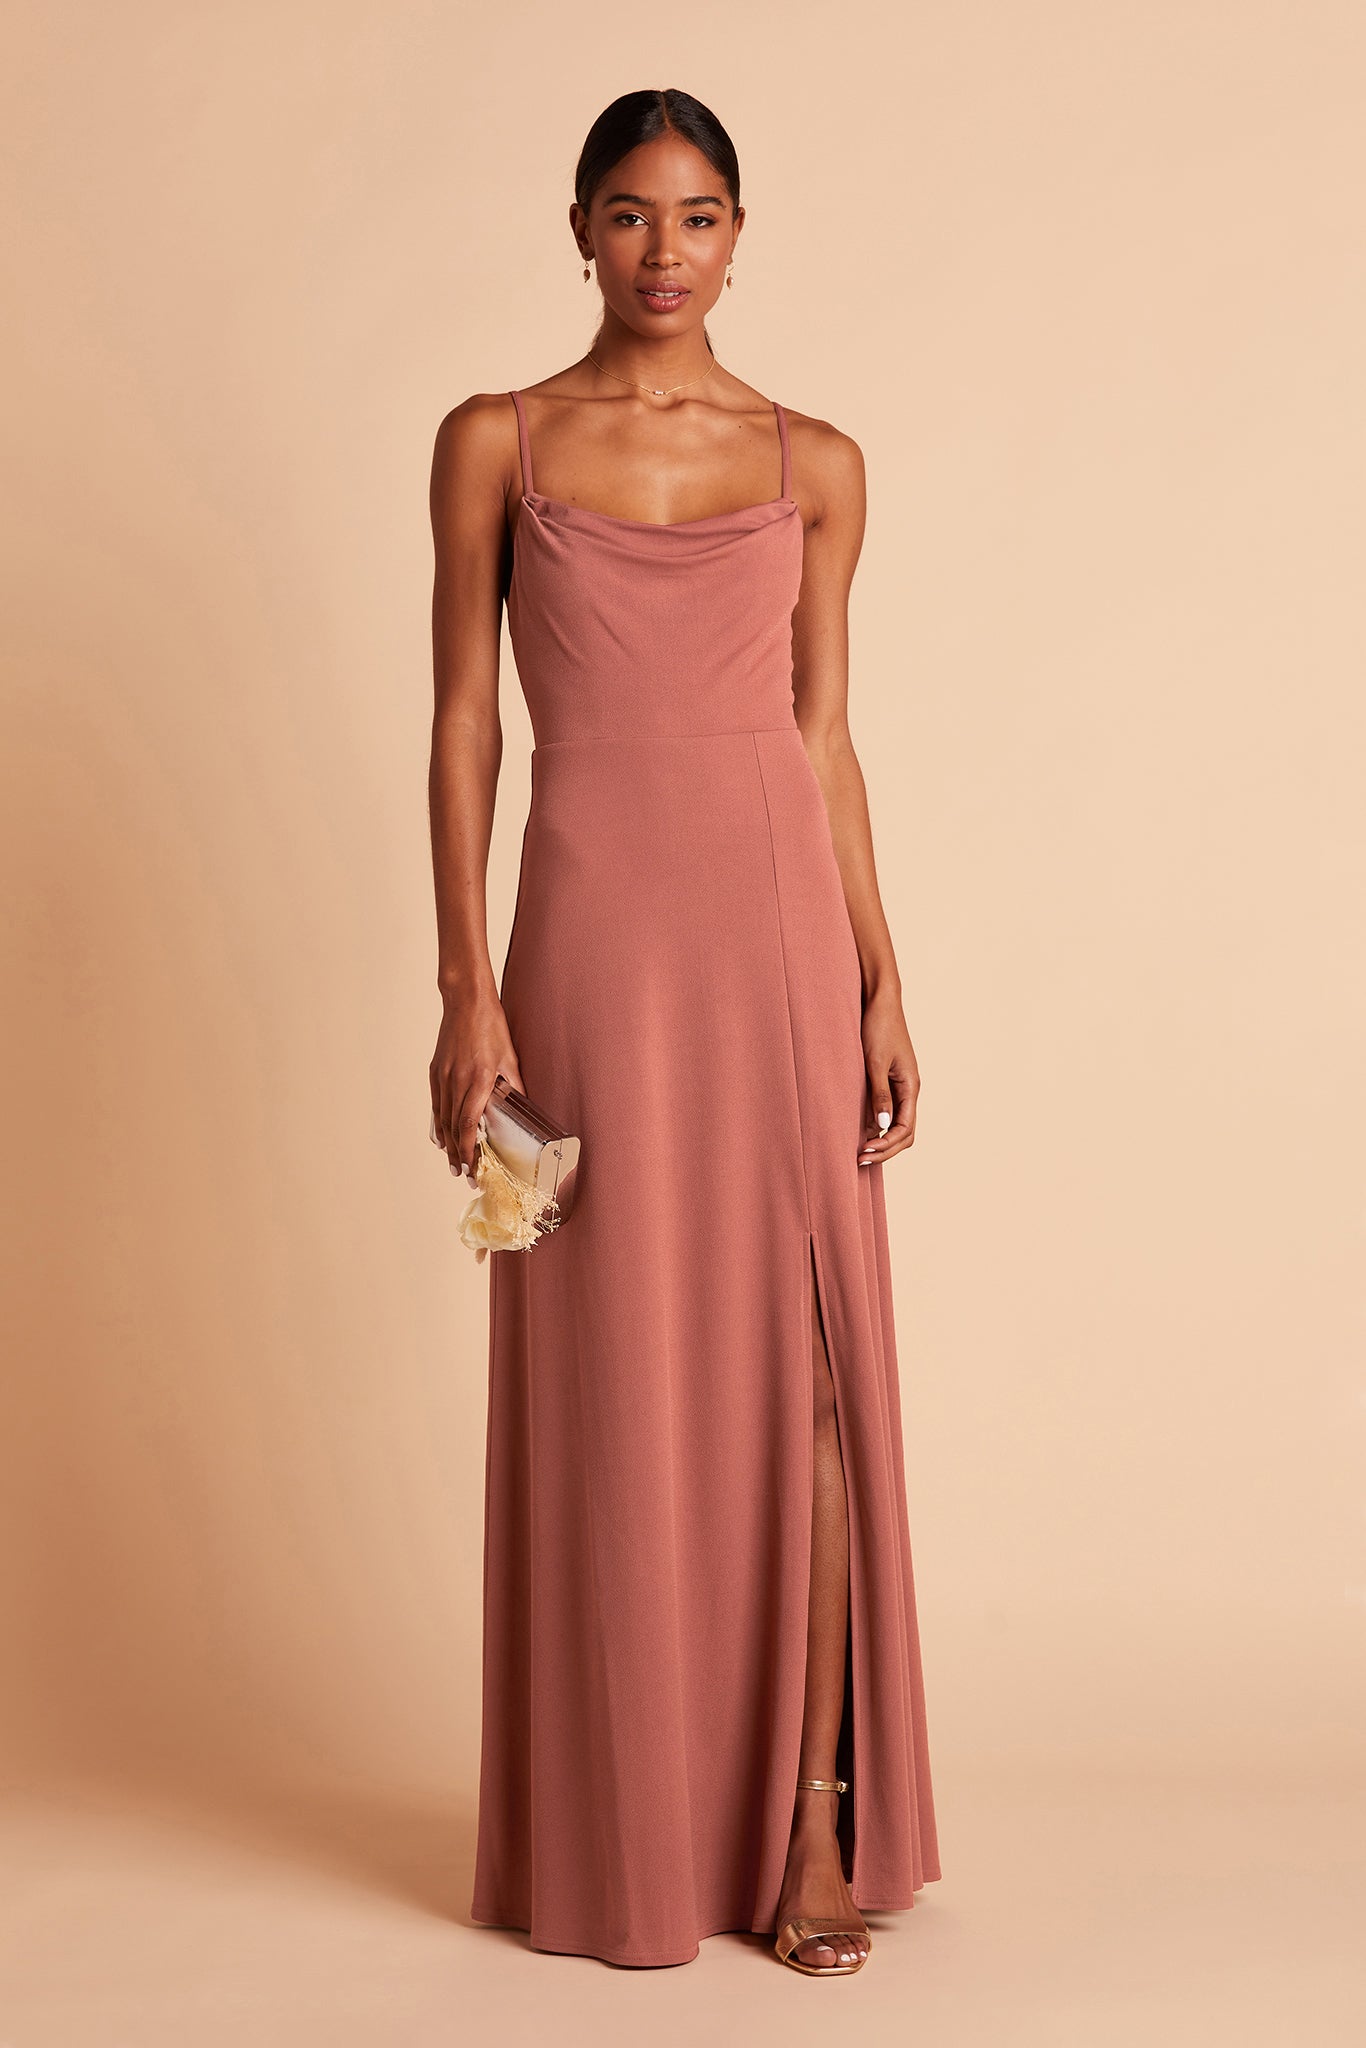 Ash bridesmaid dress with slit in desert rose by Birdy Grey, front view